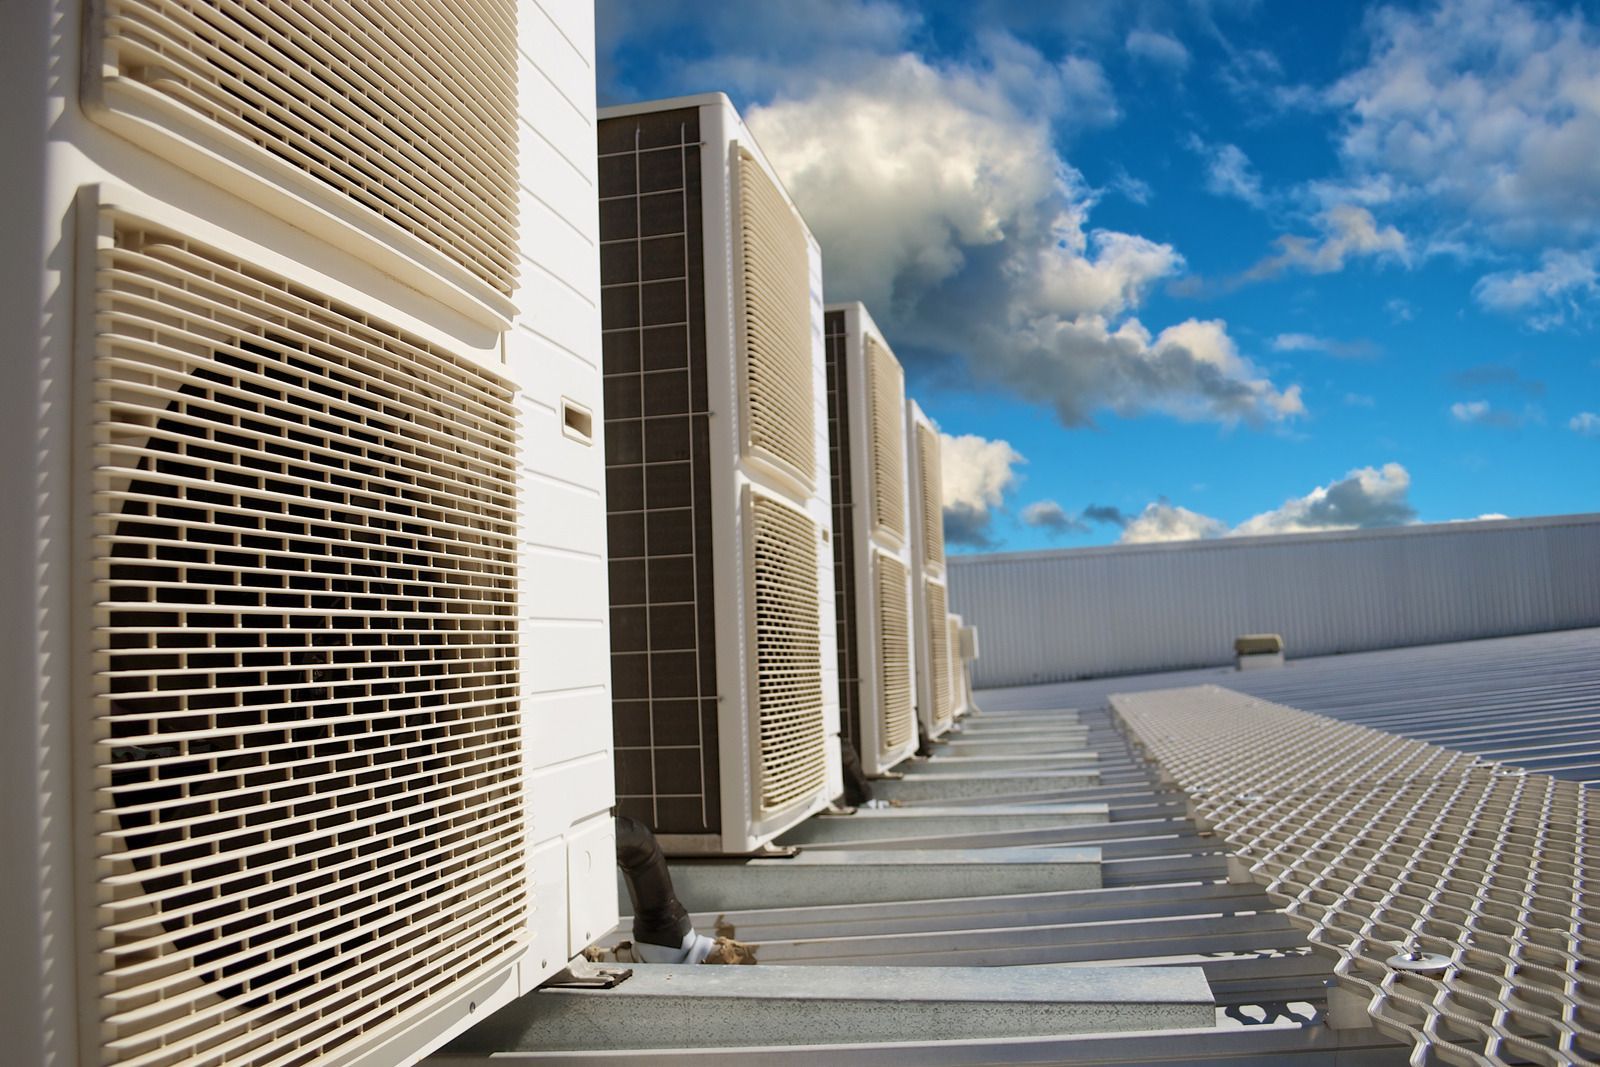 A row of air conditioners are lined up on the side of a building.